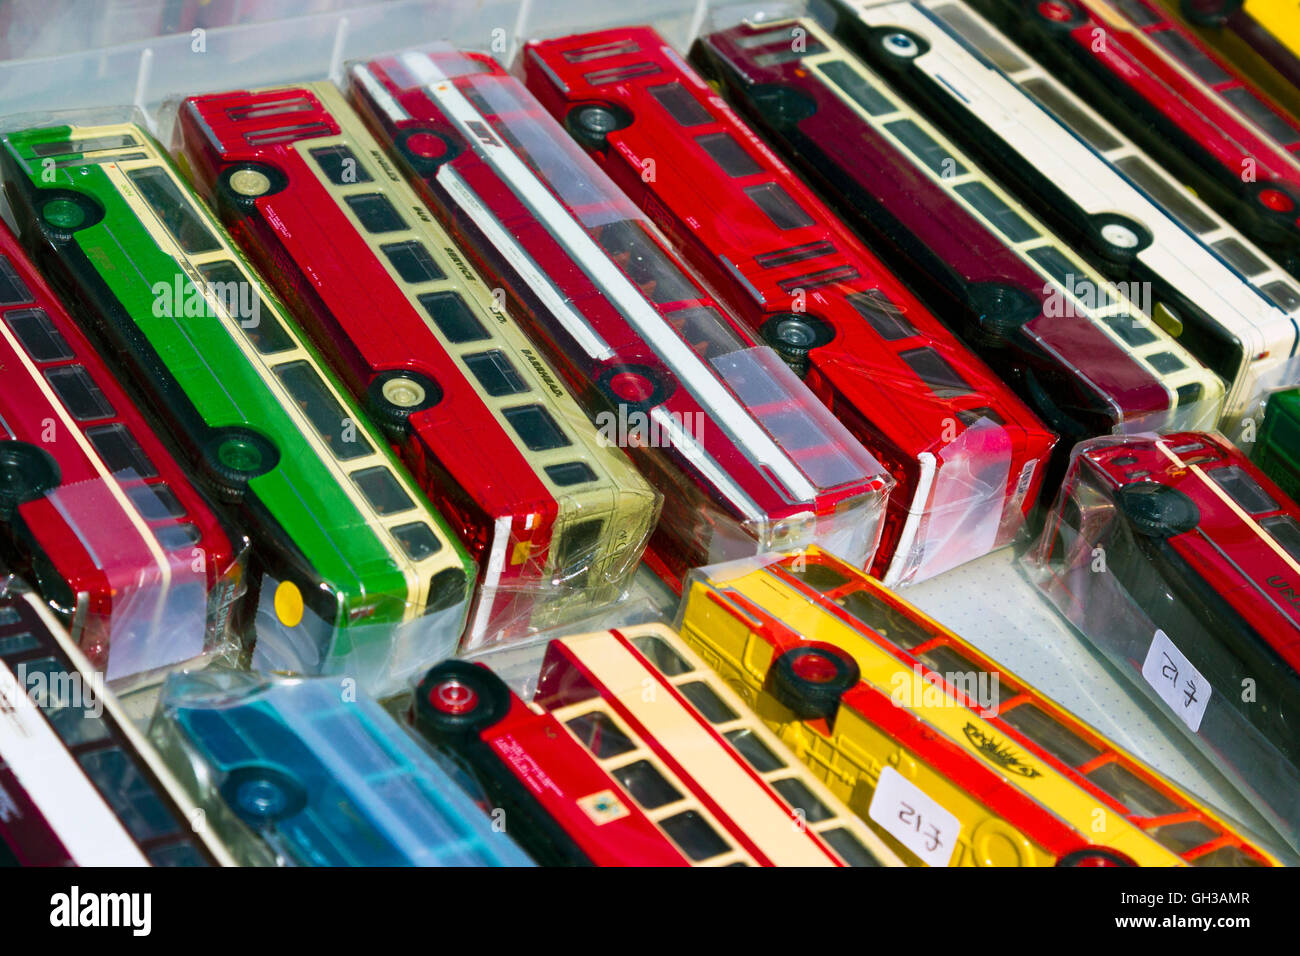 Collection of model vintage buses for sale Stock Photo